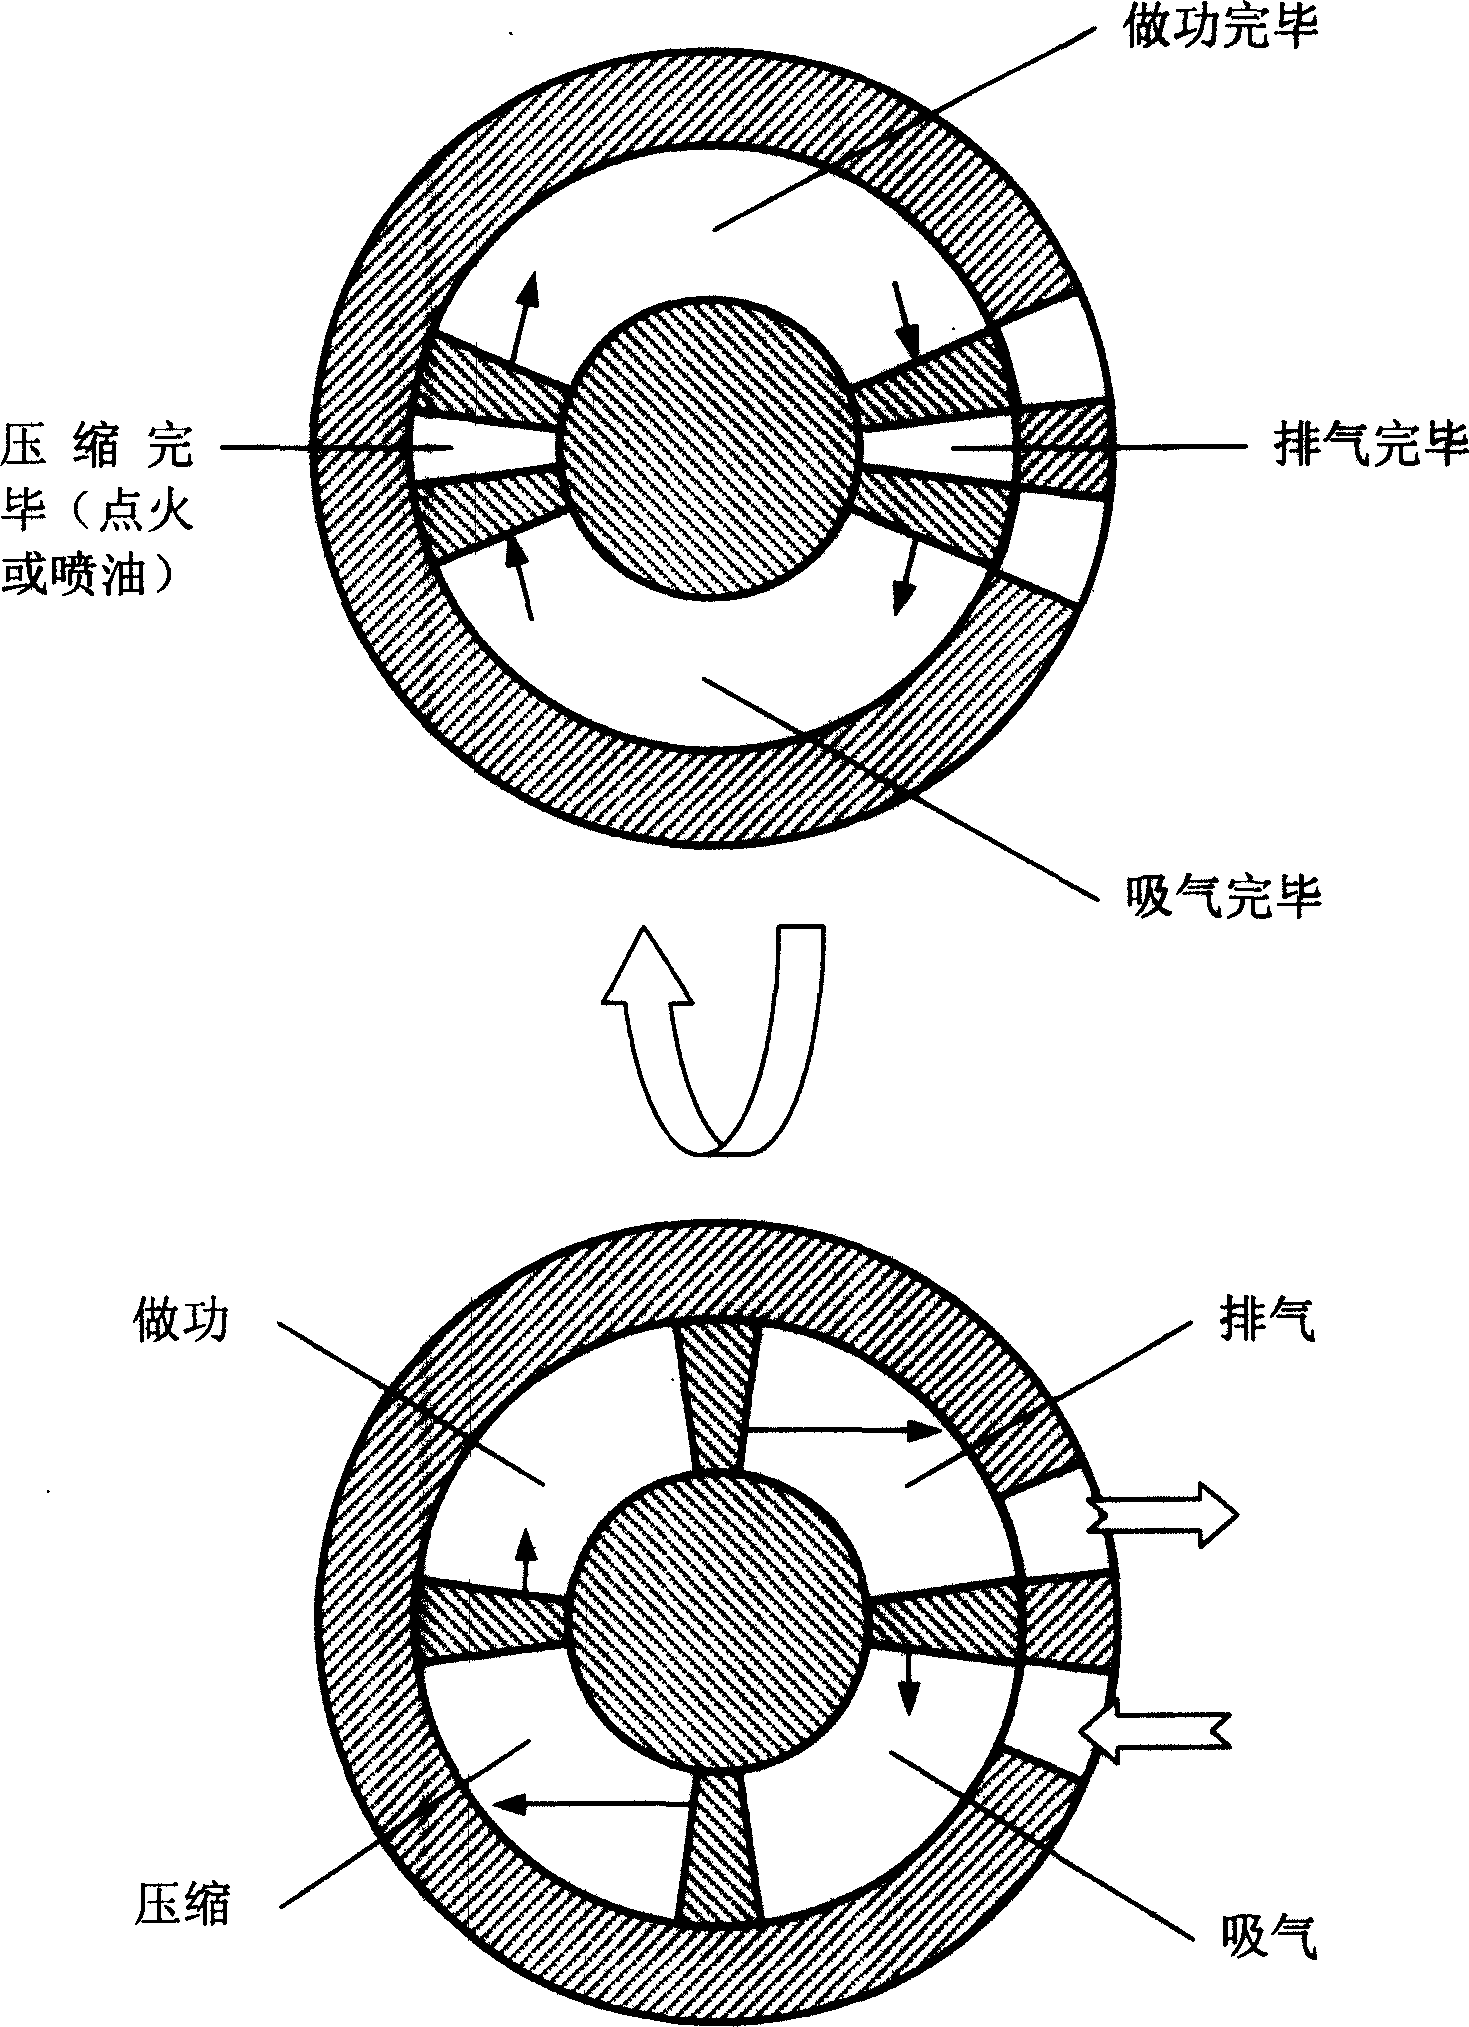 Angle variable rotor engine with a planet gear